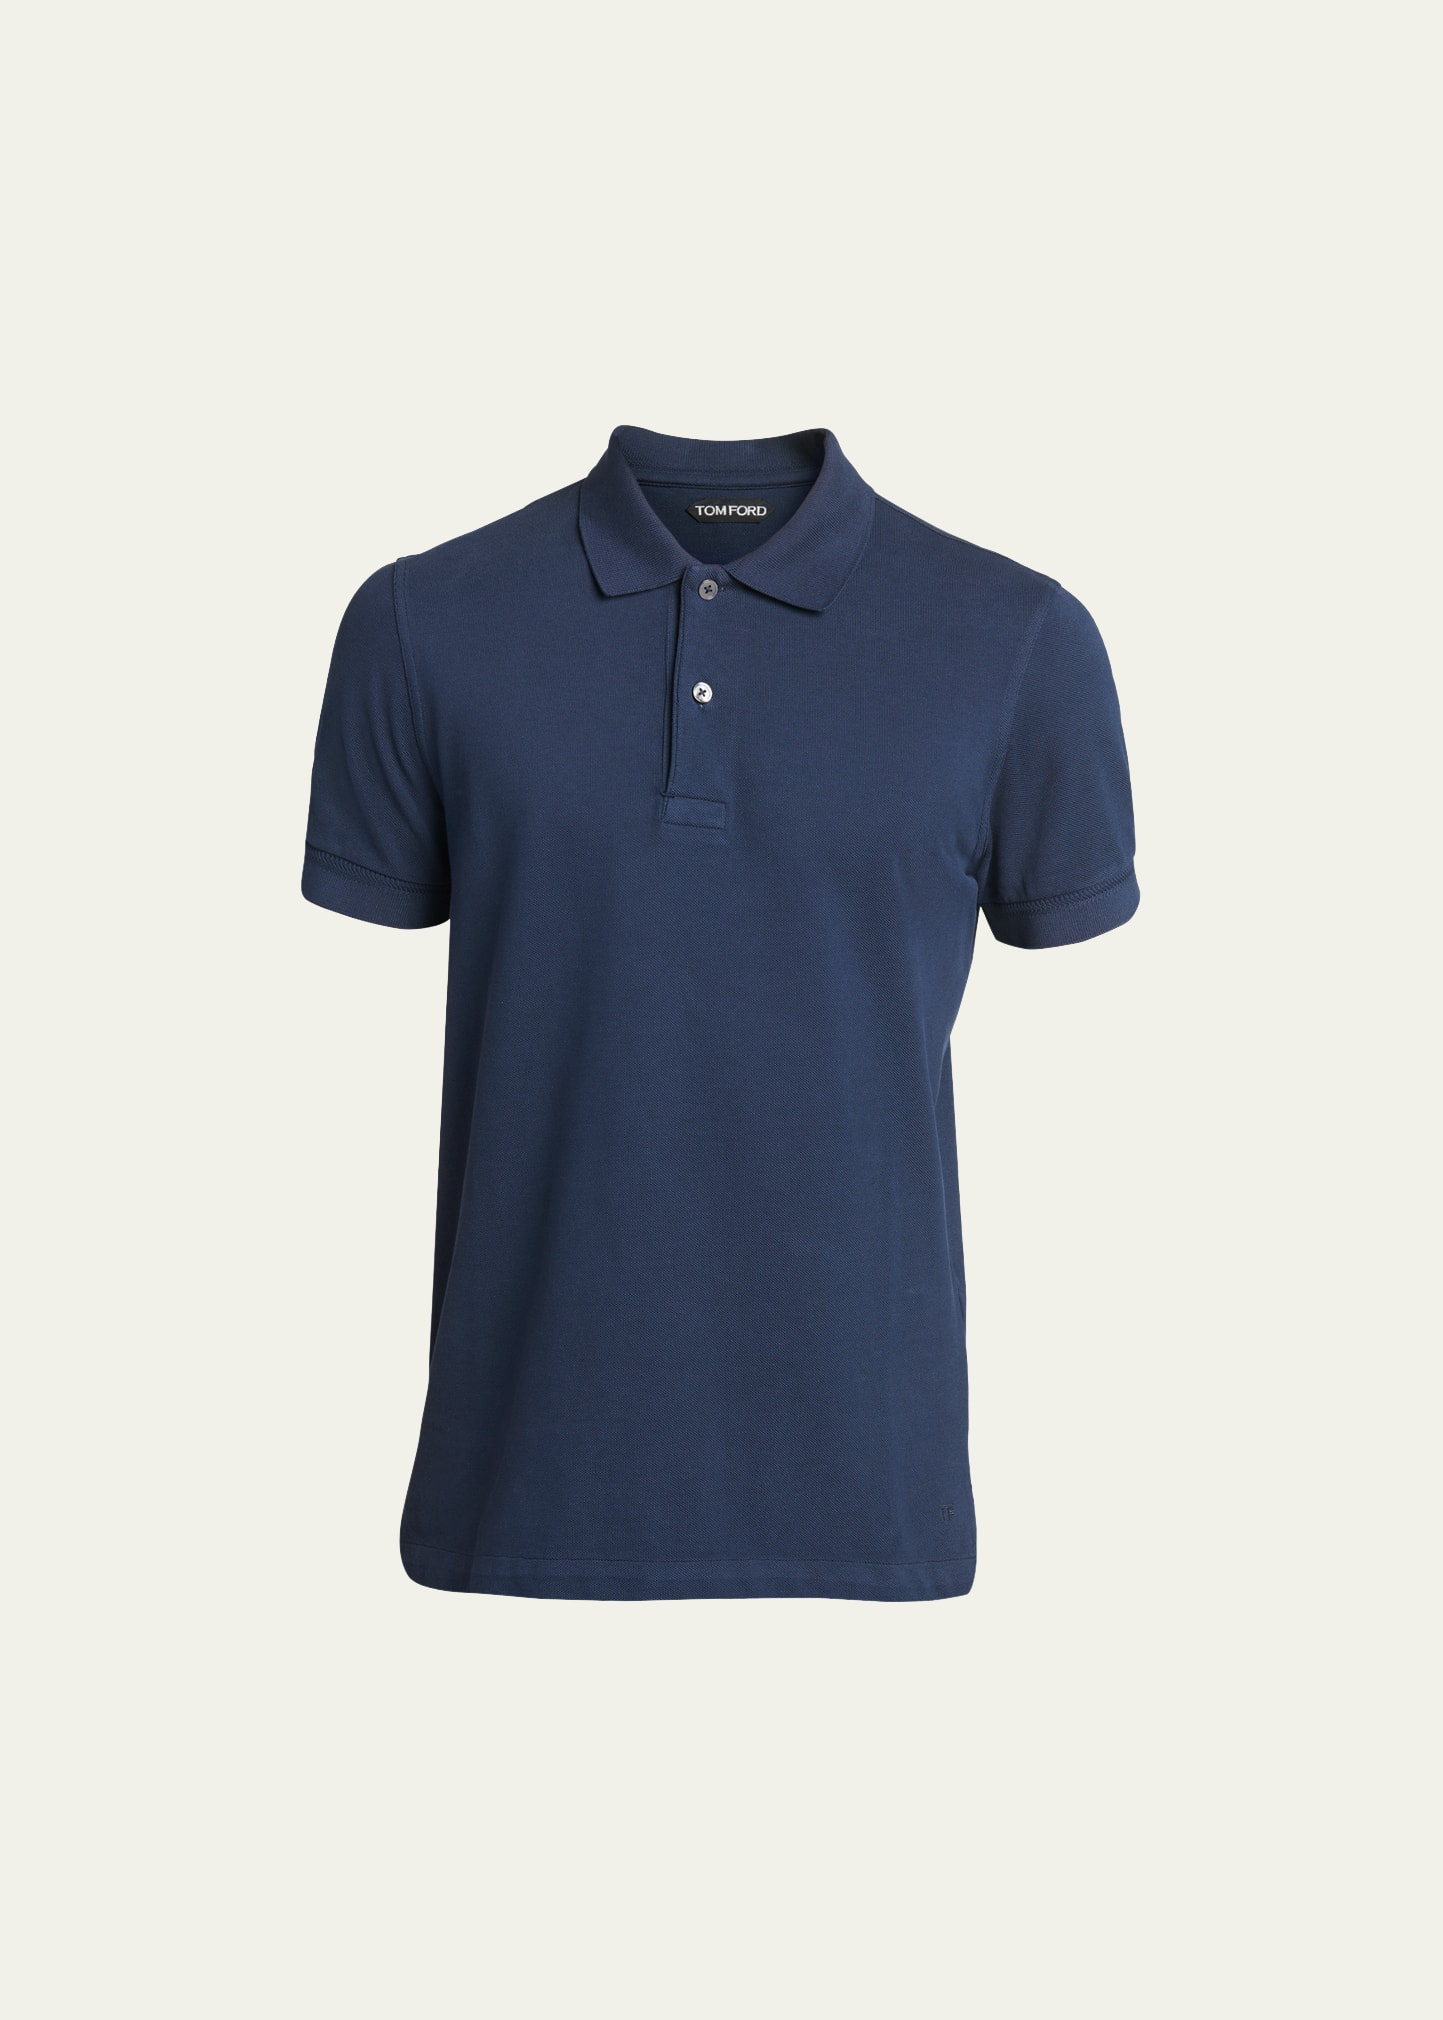 Tom Ford Men's Cotton Pique Polo Shirt In Ink